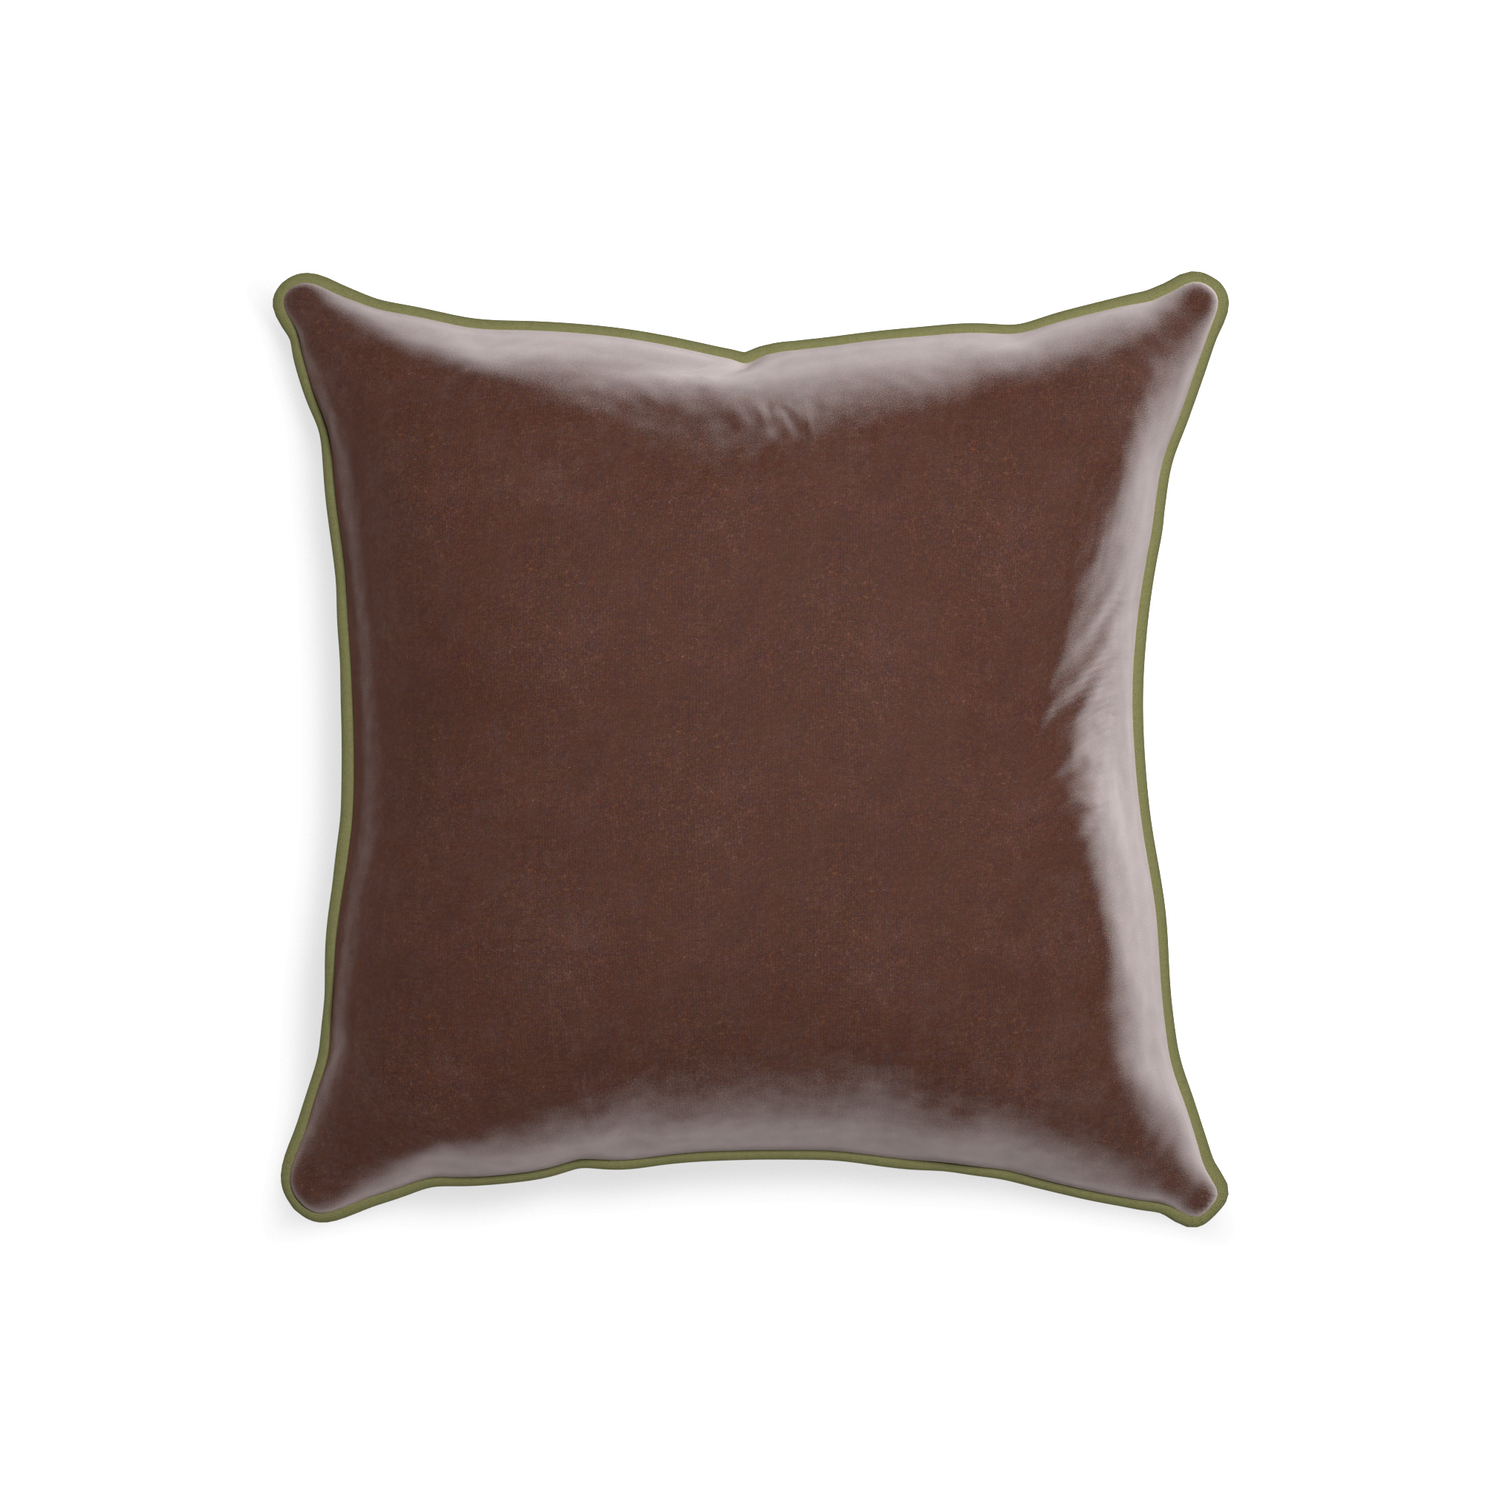 20-square walnut velvet custom pillow with moss piping on white background